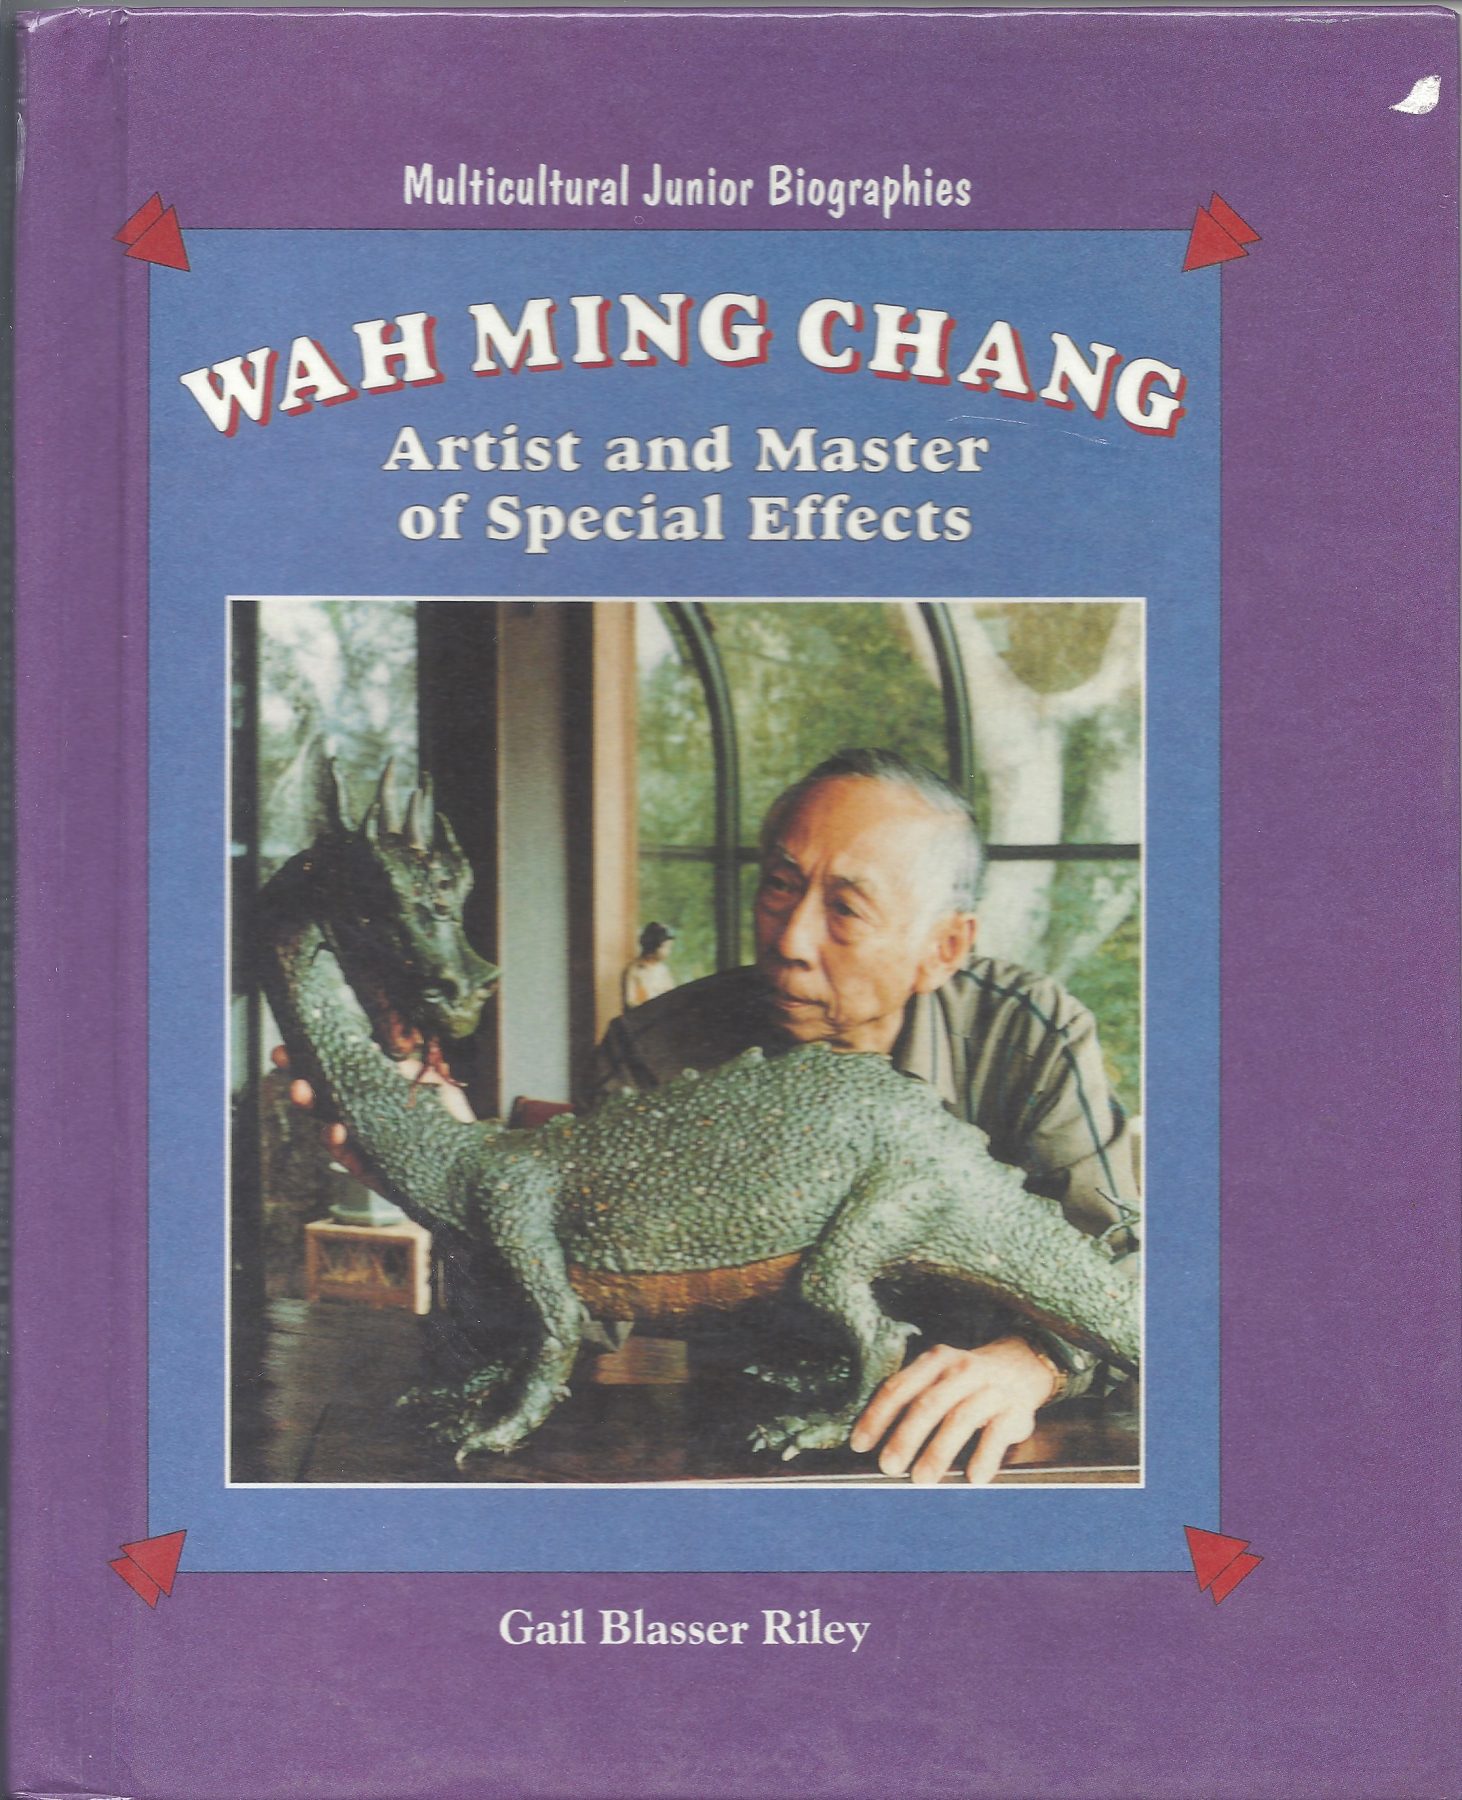 24 September 2019 Posted.
Book Wah Ming Chang: Artist and Master of Special Effects. Courtesy of Alex Jay, Museum of Chinese in America (MOCA) Collection. 
有关郑华明的书《郑华明：特效艺术家和大师》Alex Jay捐赠，美国华人博物馆（MOCA）馆藏